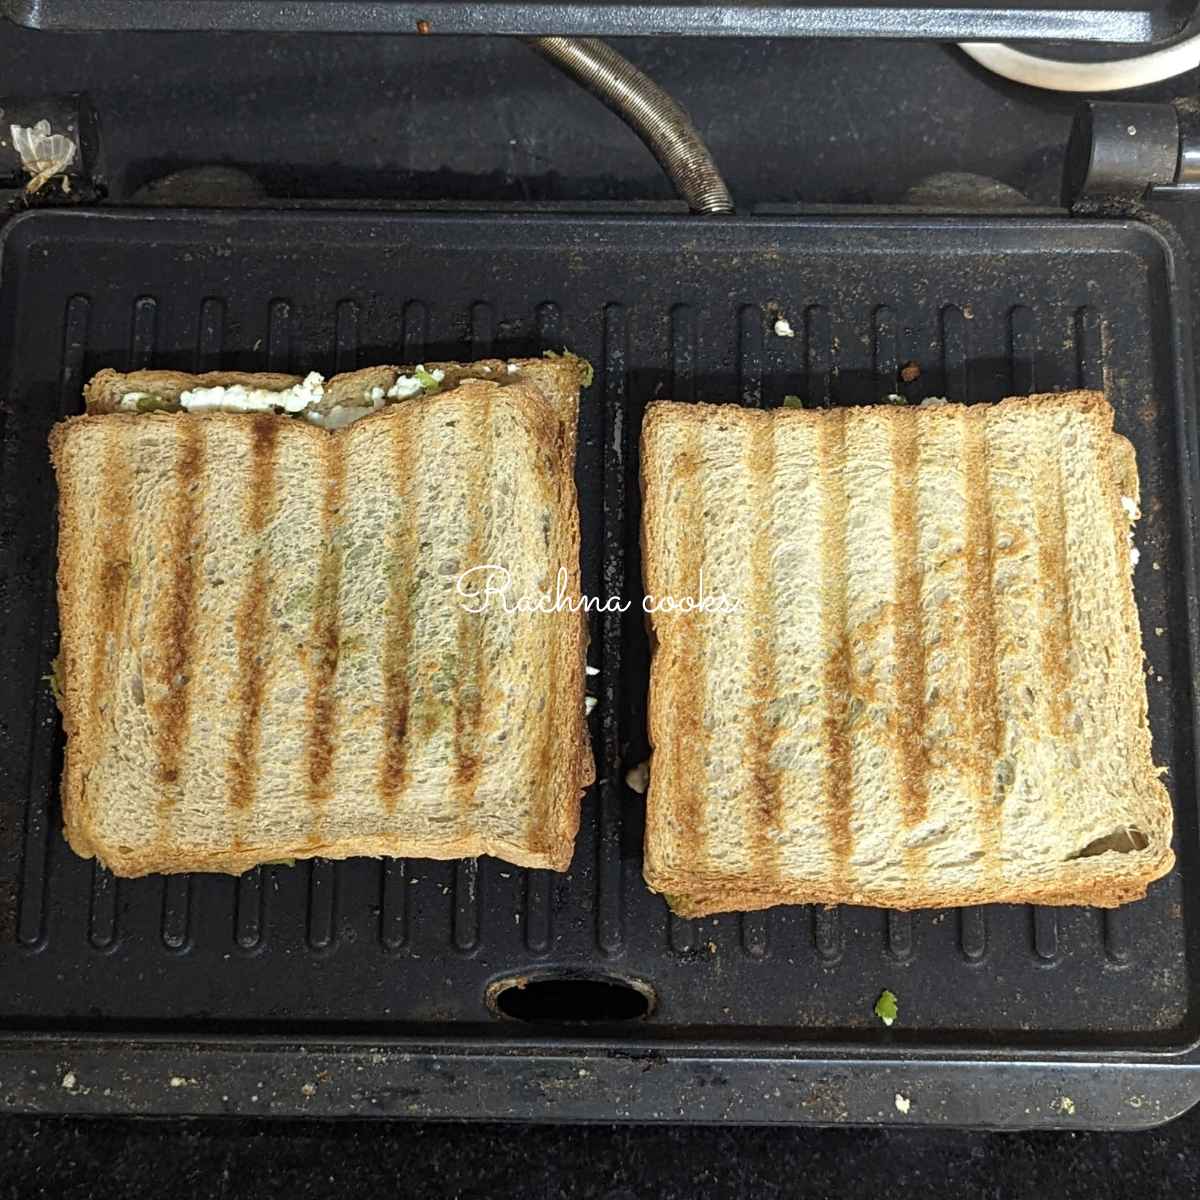 Two Paneer sandwiches in the grill for grilling.